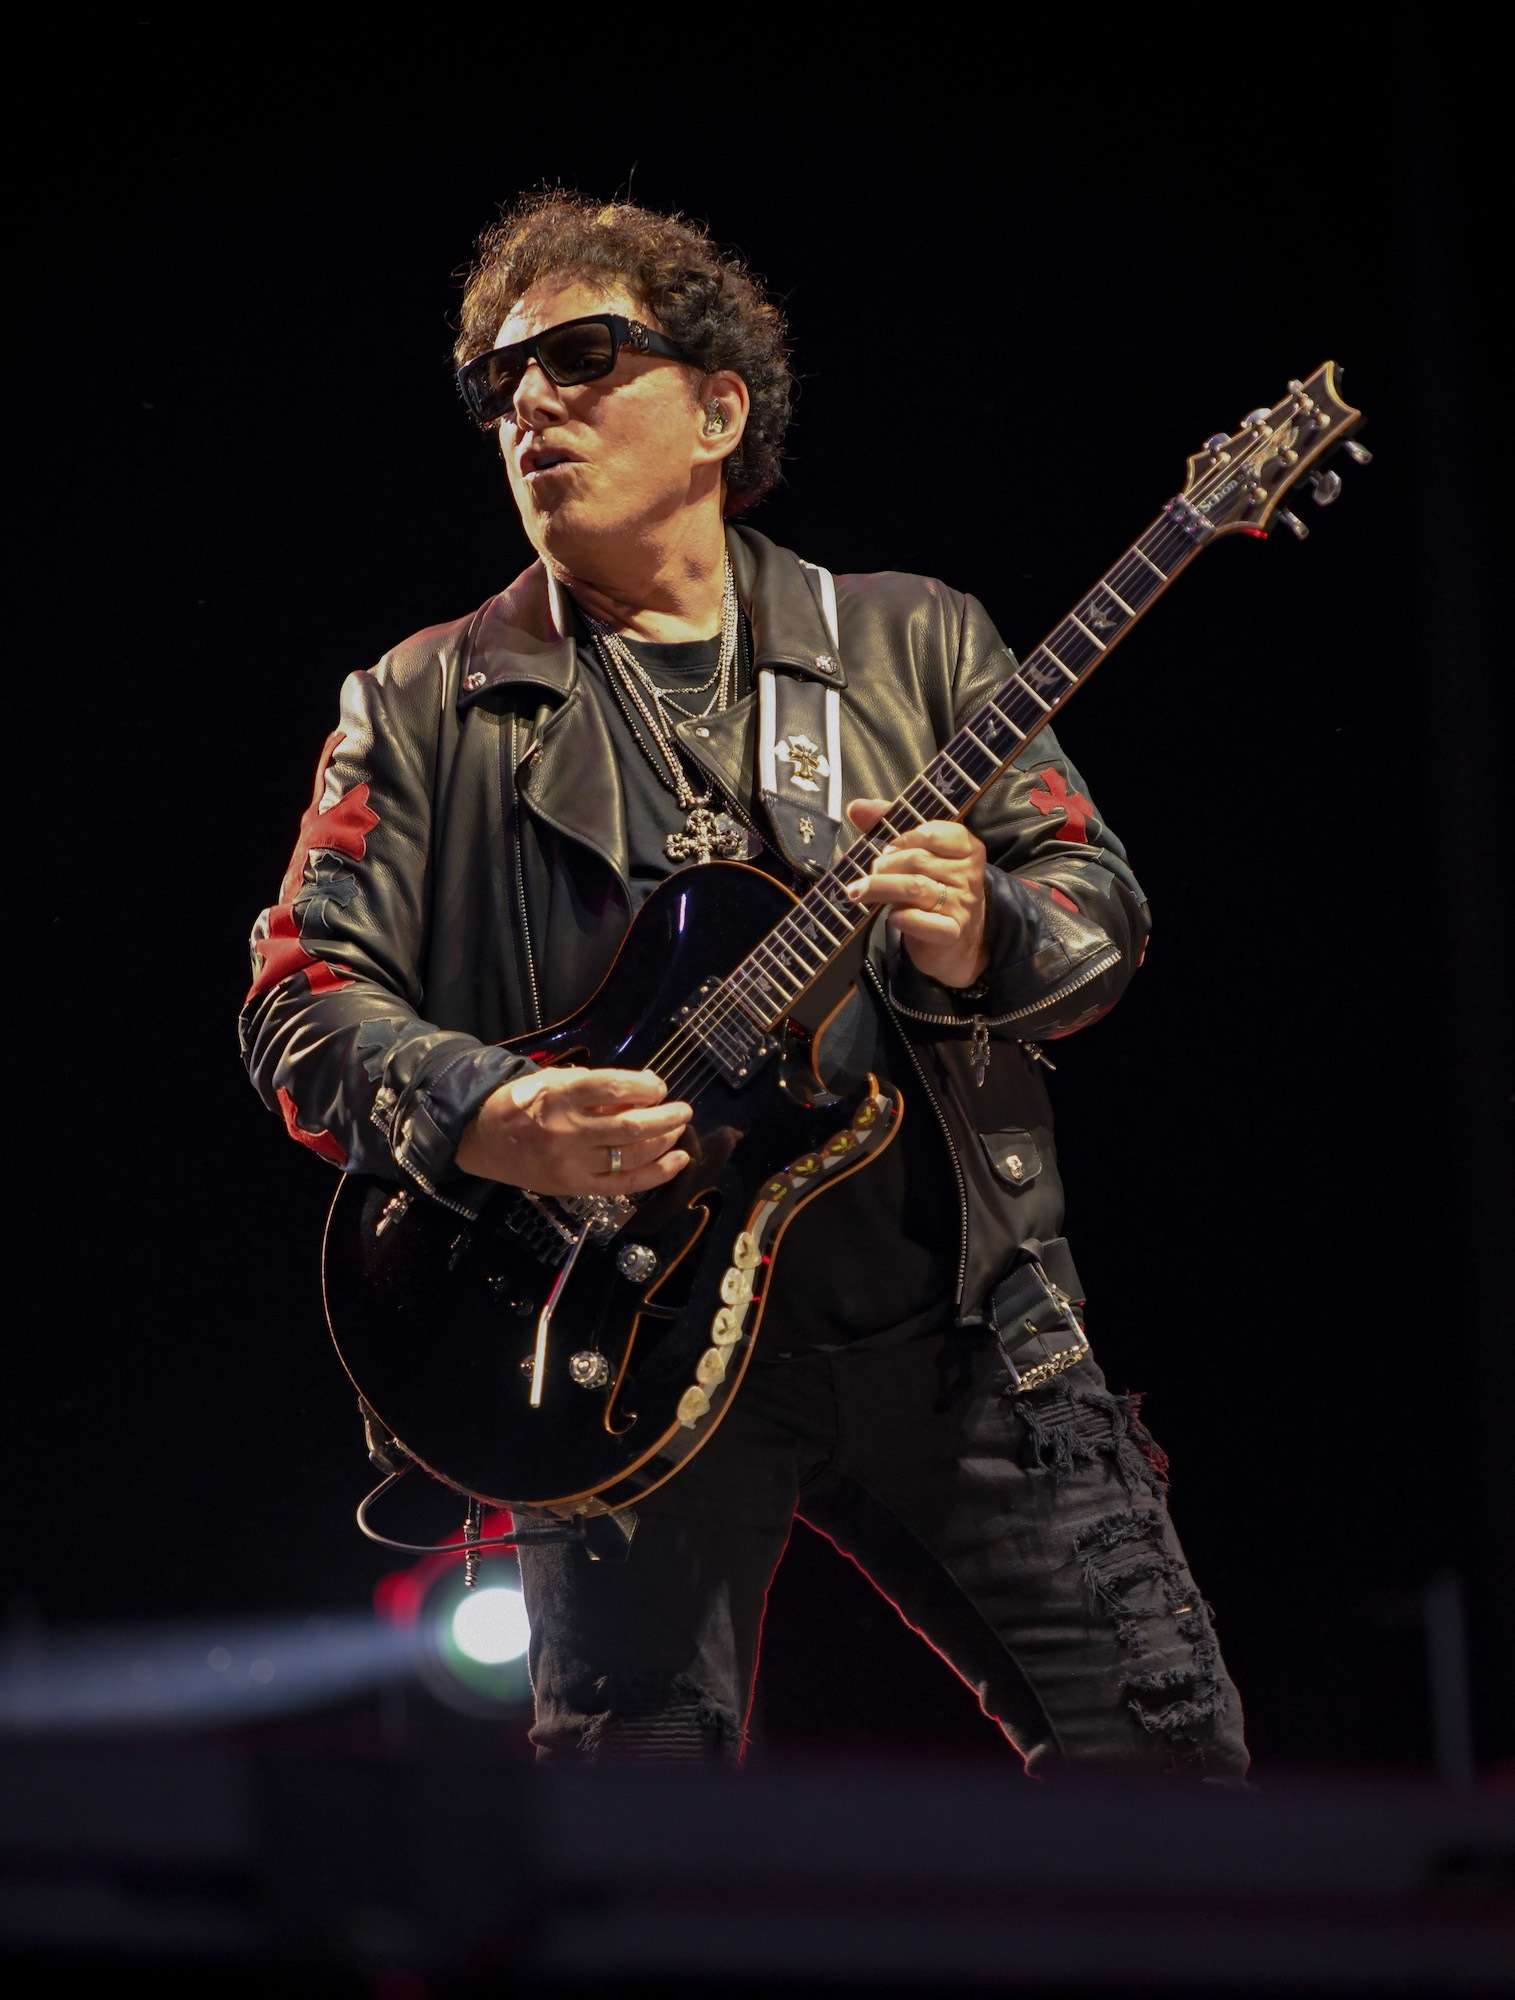 Journey Live at Lollapalooza [GALLERY] 13